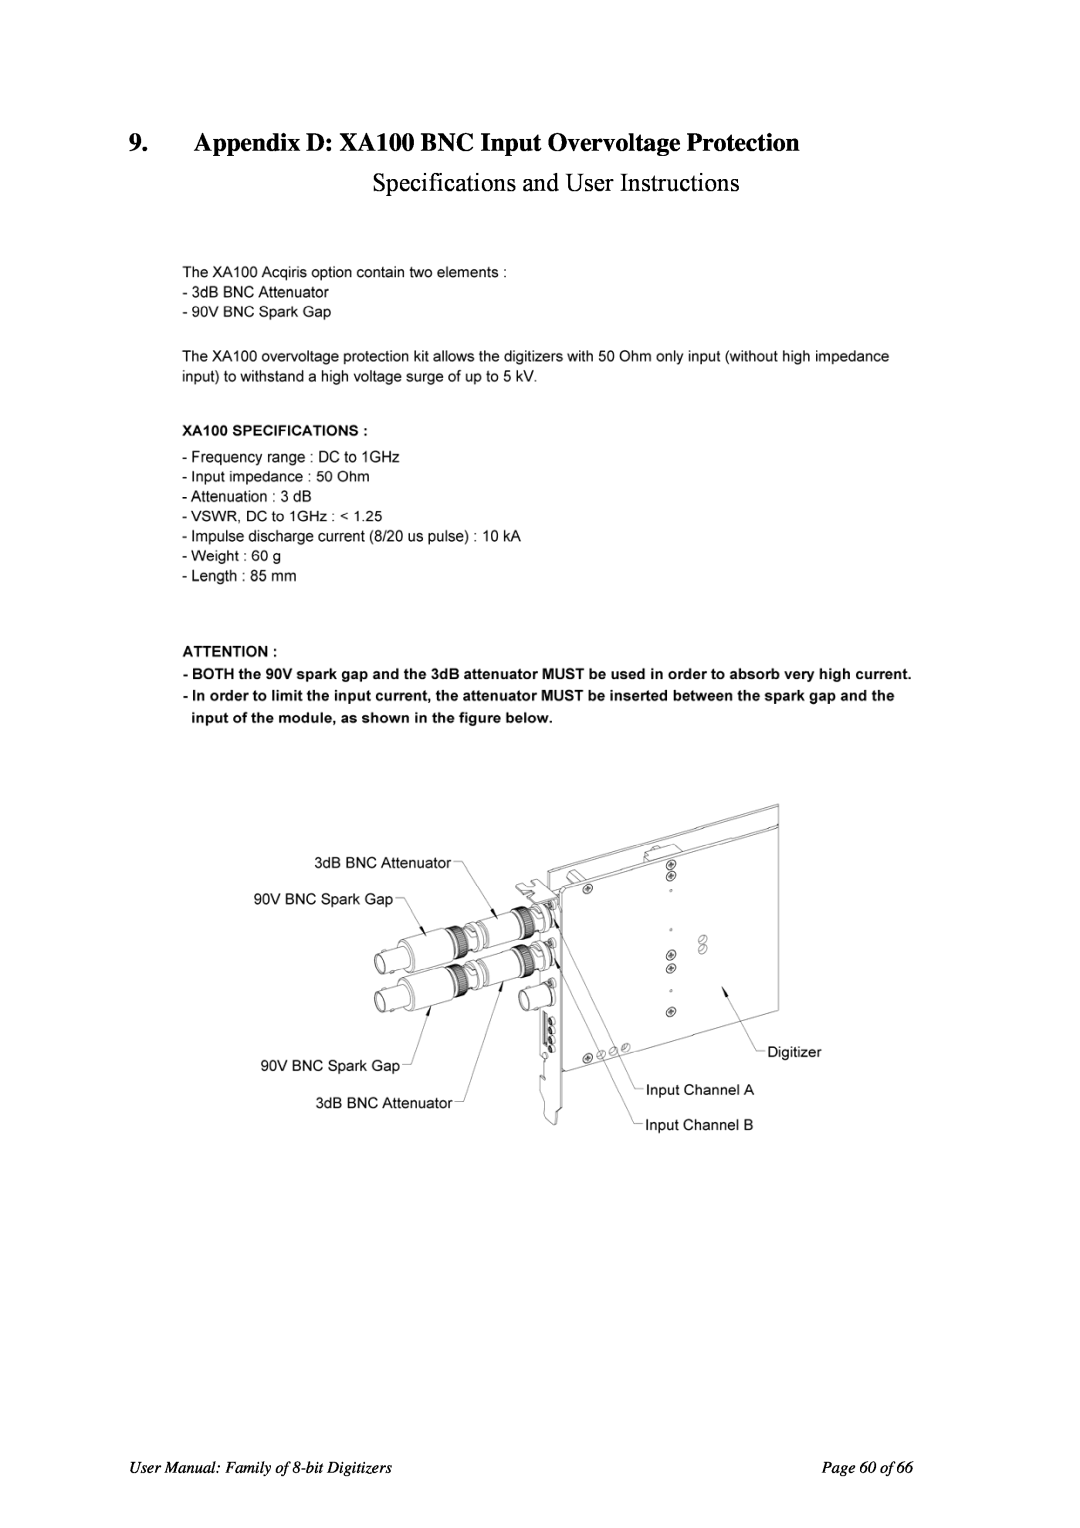 Agilent Technologies DP240, DP212, DP214, DP110, DP1400, DP111, DP210, DP235 User Manual Family of 8-bit Digitizers, Page 60 of 